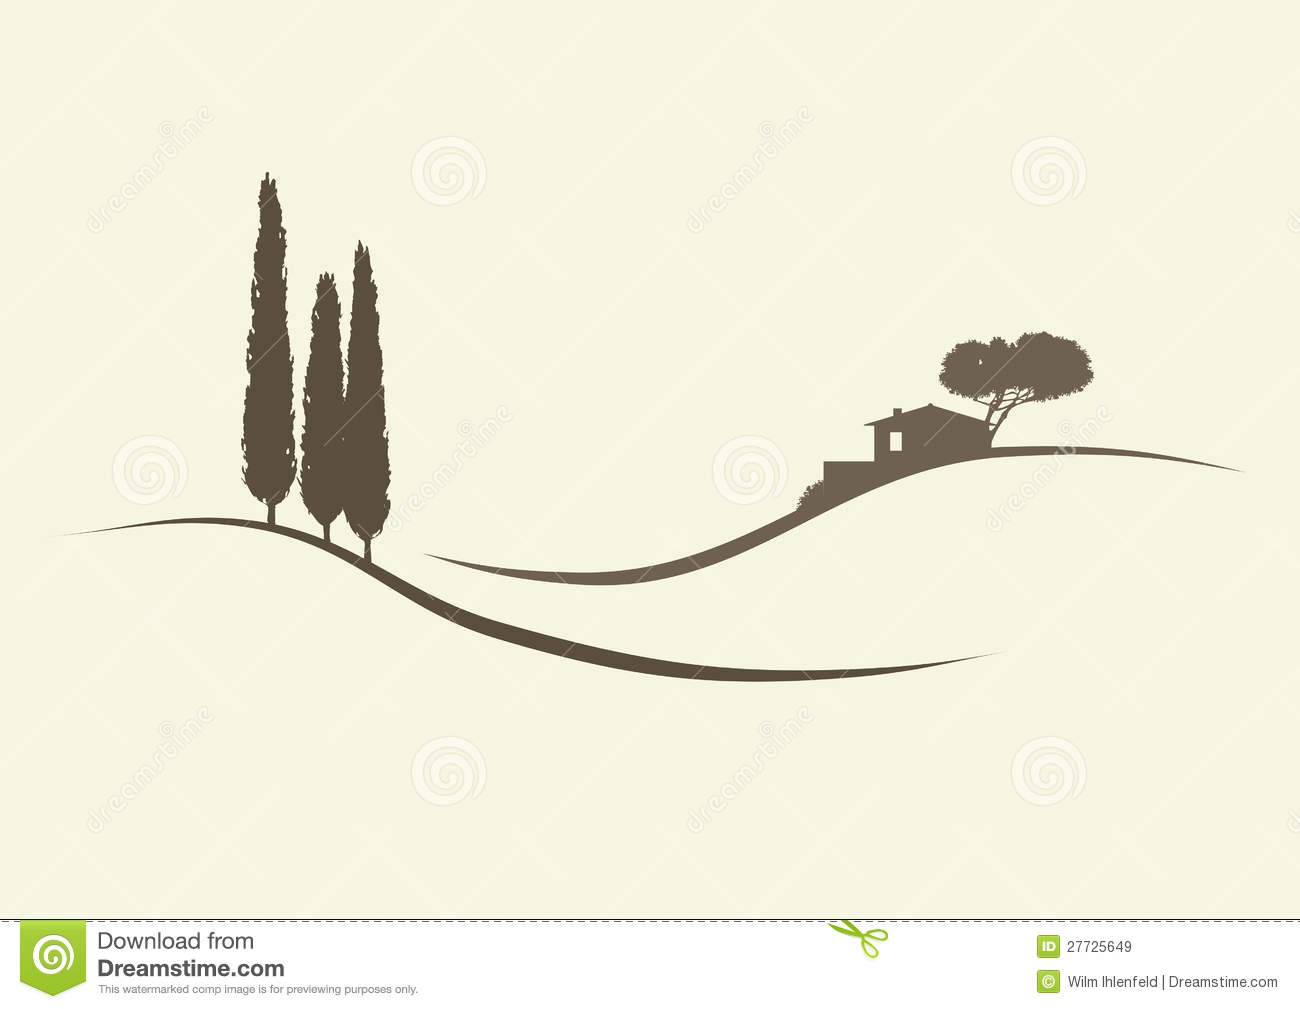 Finca And Cypress Trees Royalty Free Stock Images.